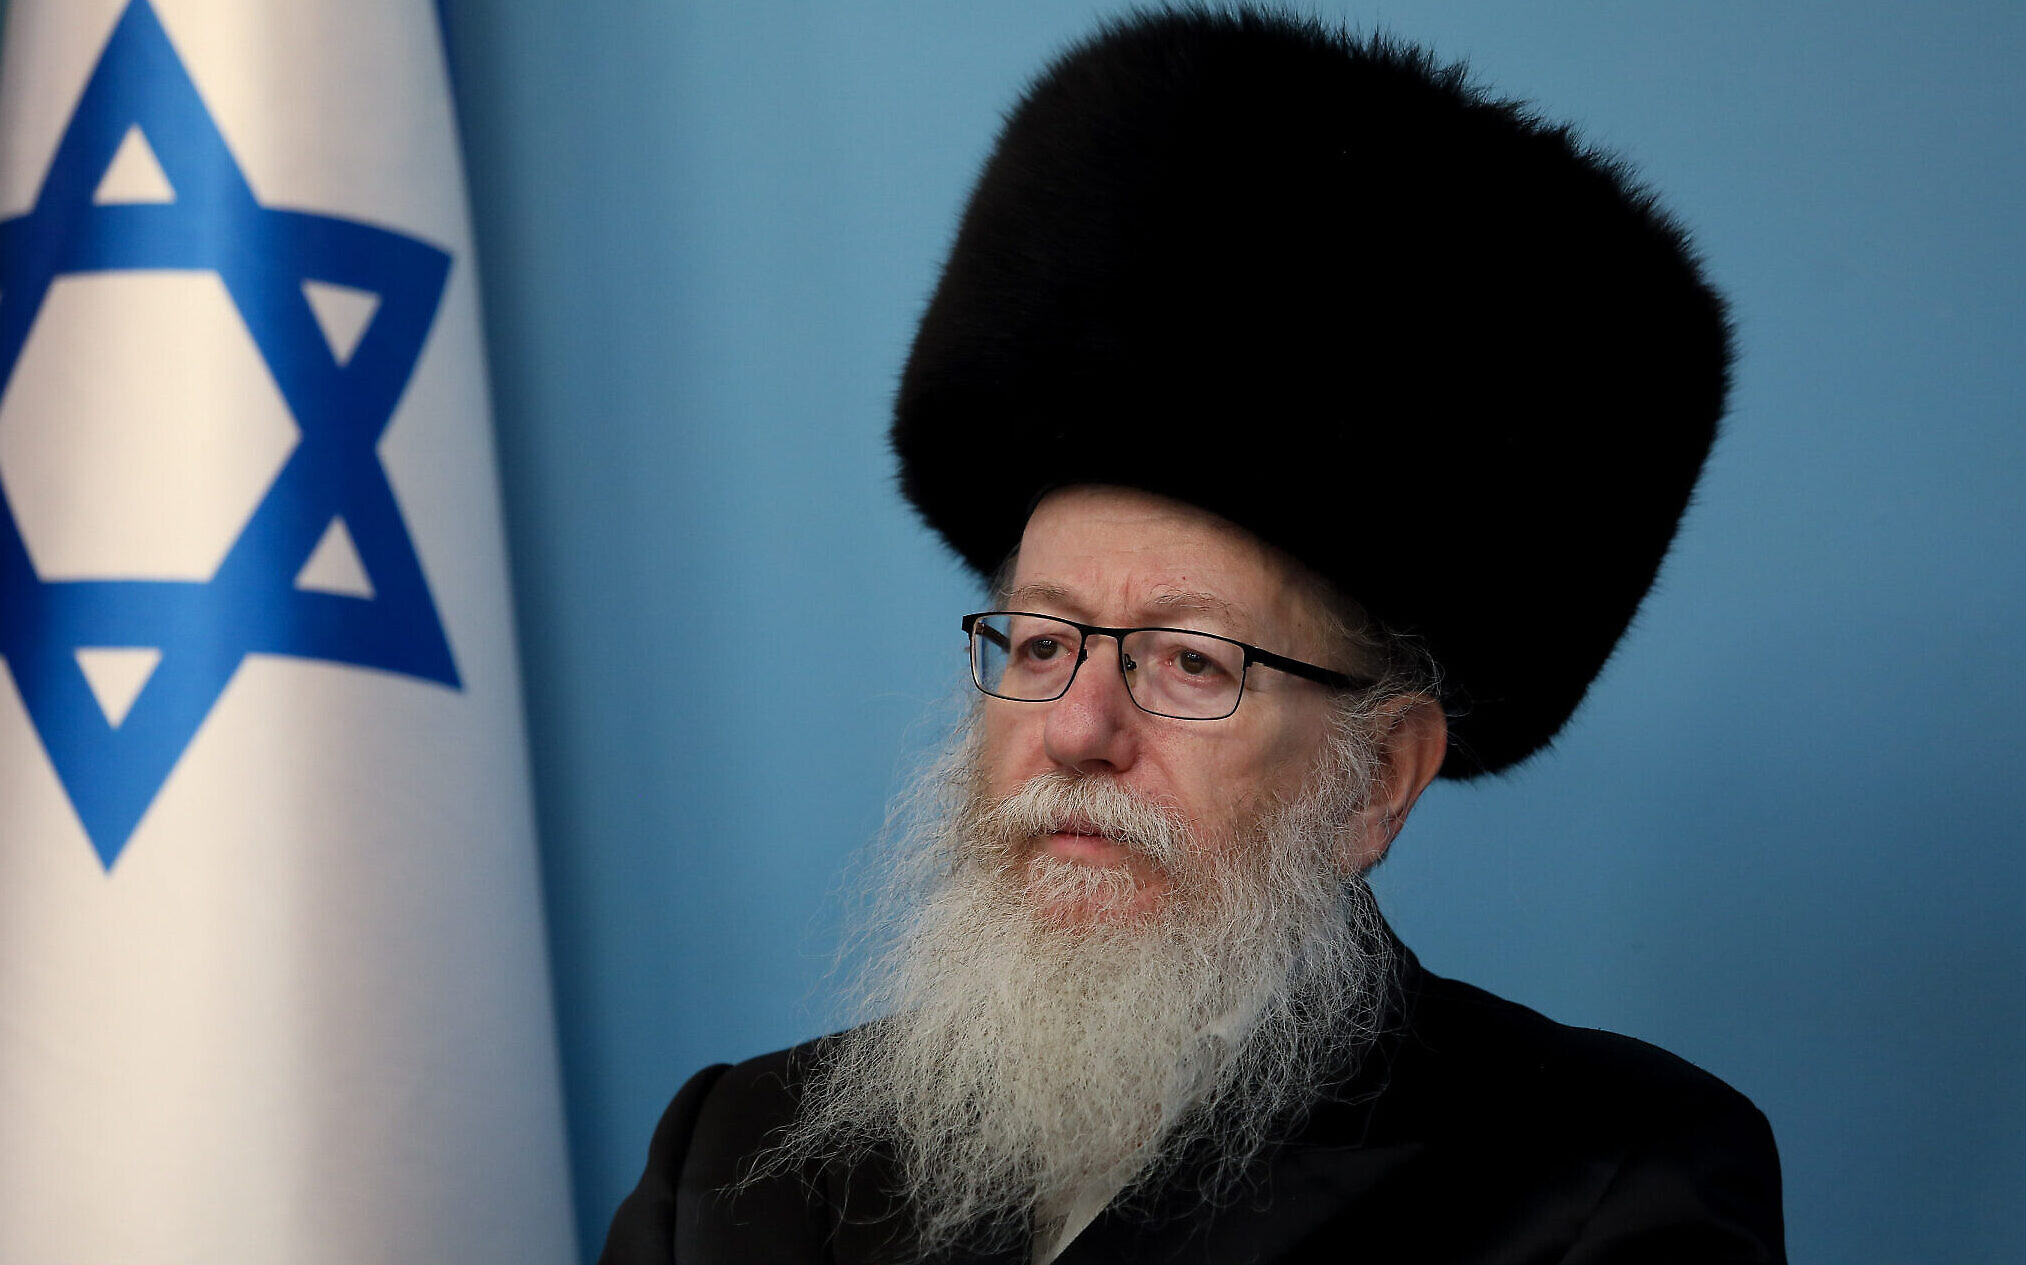 Health Minister Yaakov Litzman at a press conference about the coronavirus at the Prime Minister’s Office in Jerusalem, March 11, 2020. (Flash90)